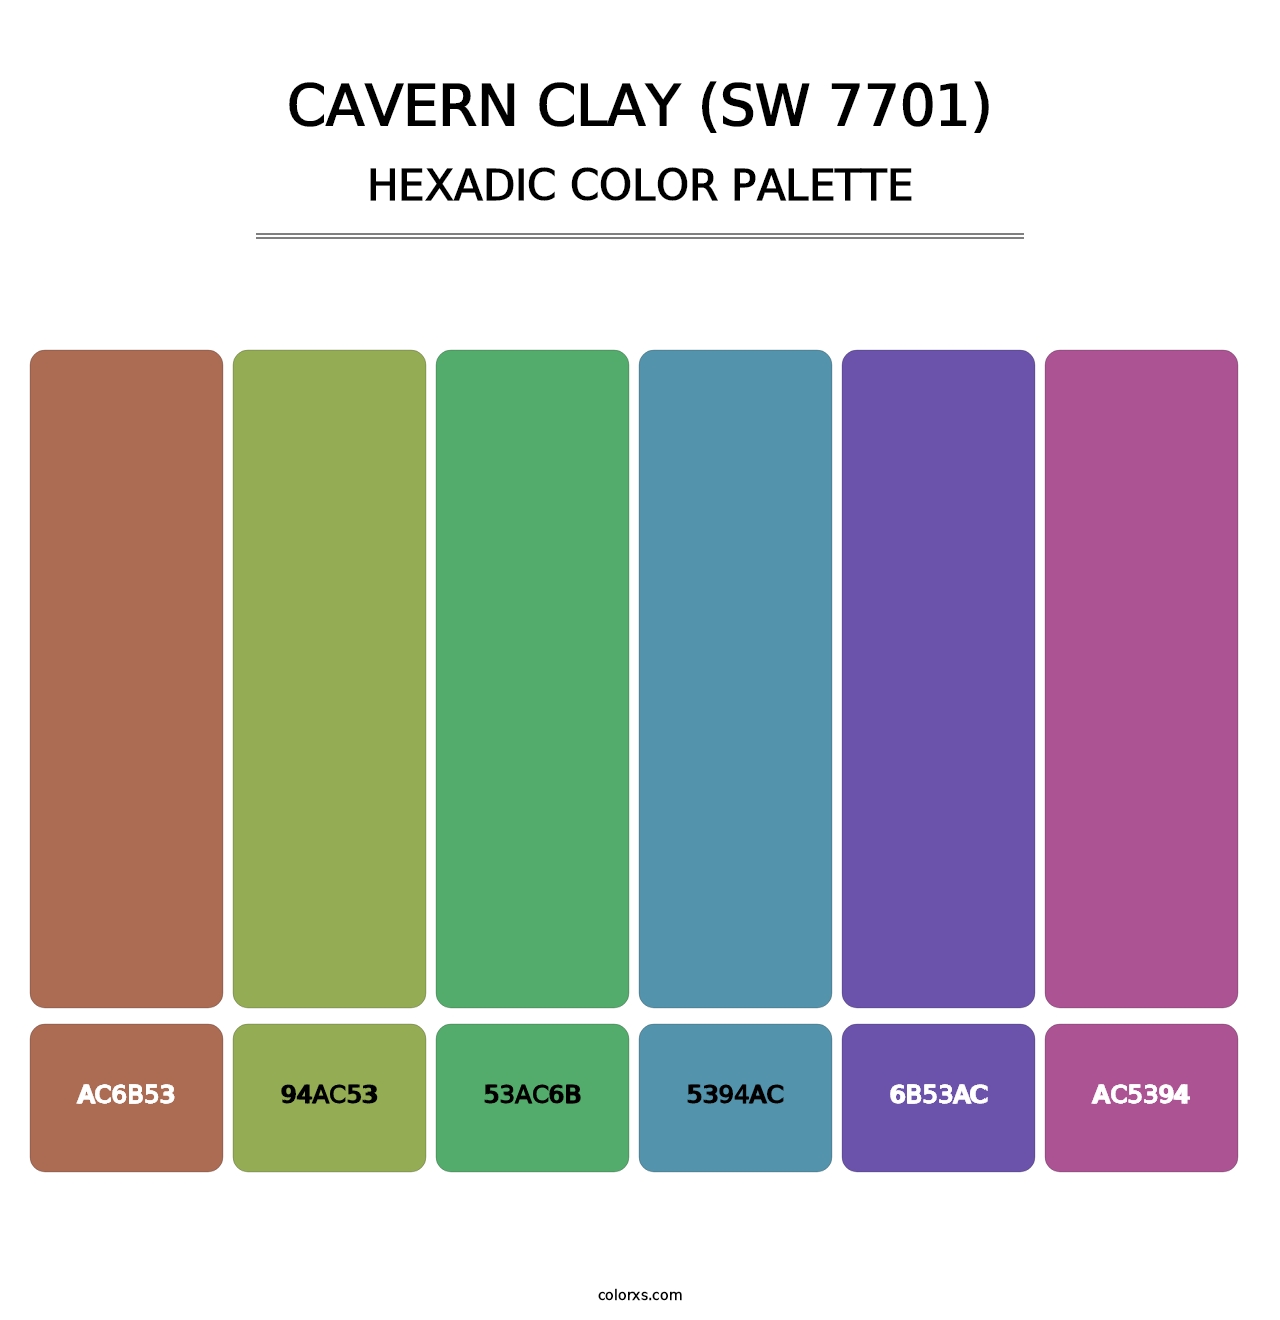 Cavern Clay (SW 7701) - Hexadic Color Palette